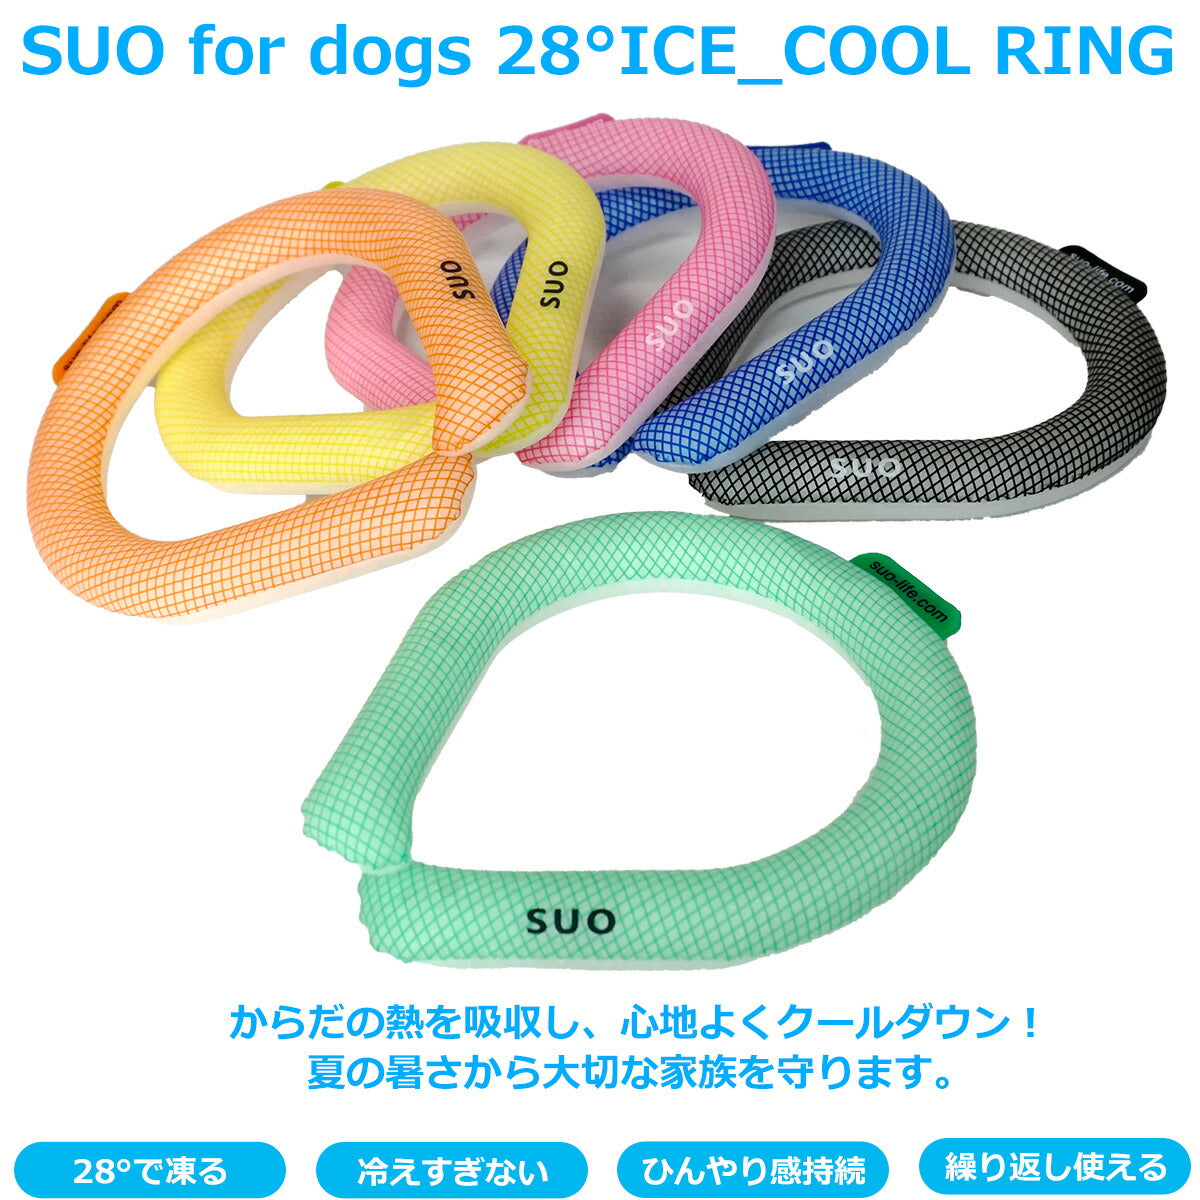 SUO for dogs 28°ICE SUOリング ボタンなし XS オレンジ 熱中症対策グッズ 暑さ対策 ひんやり 首 冷感 犬 大人 子供